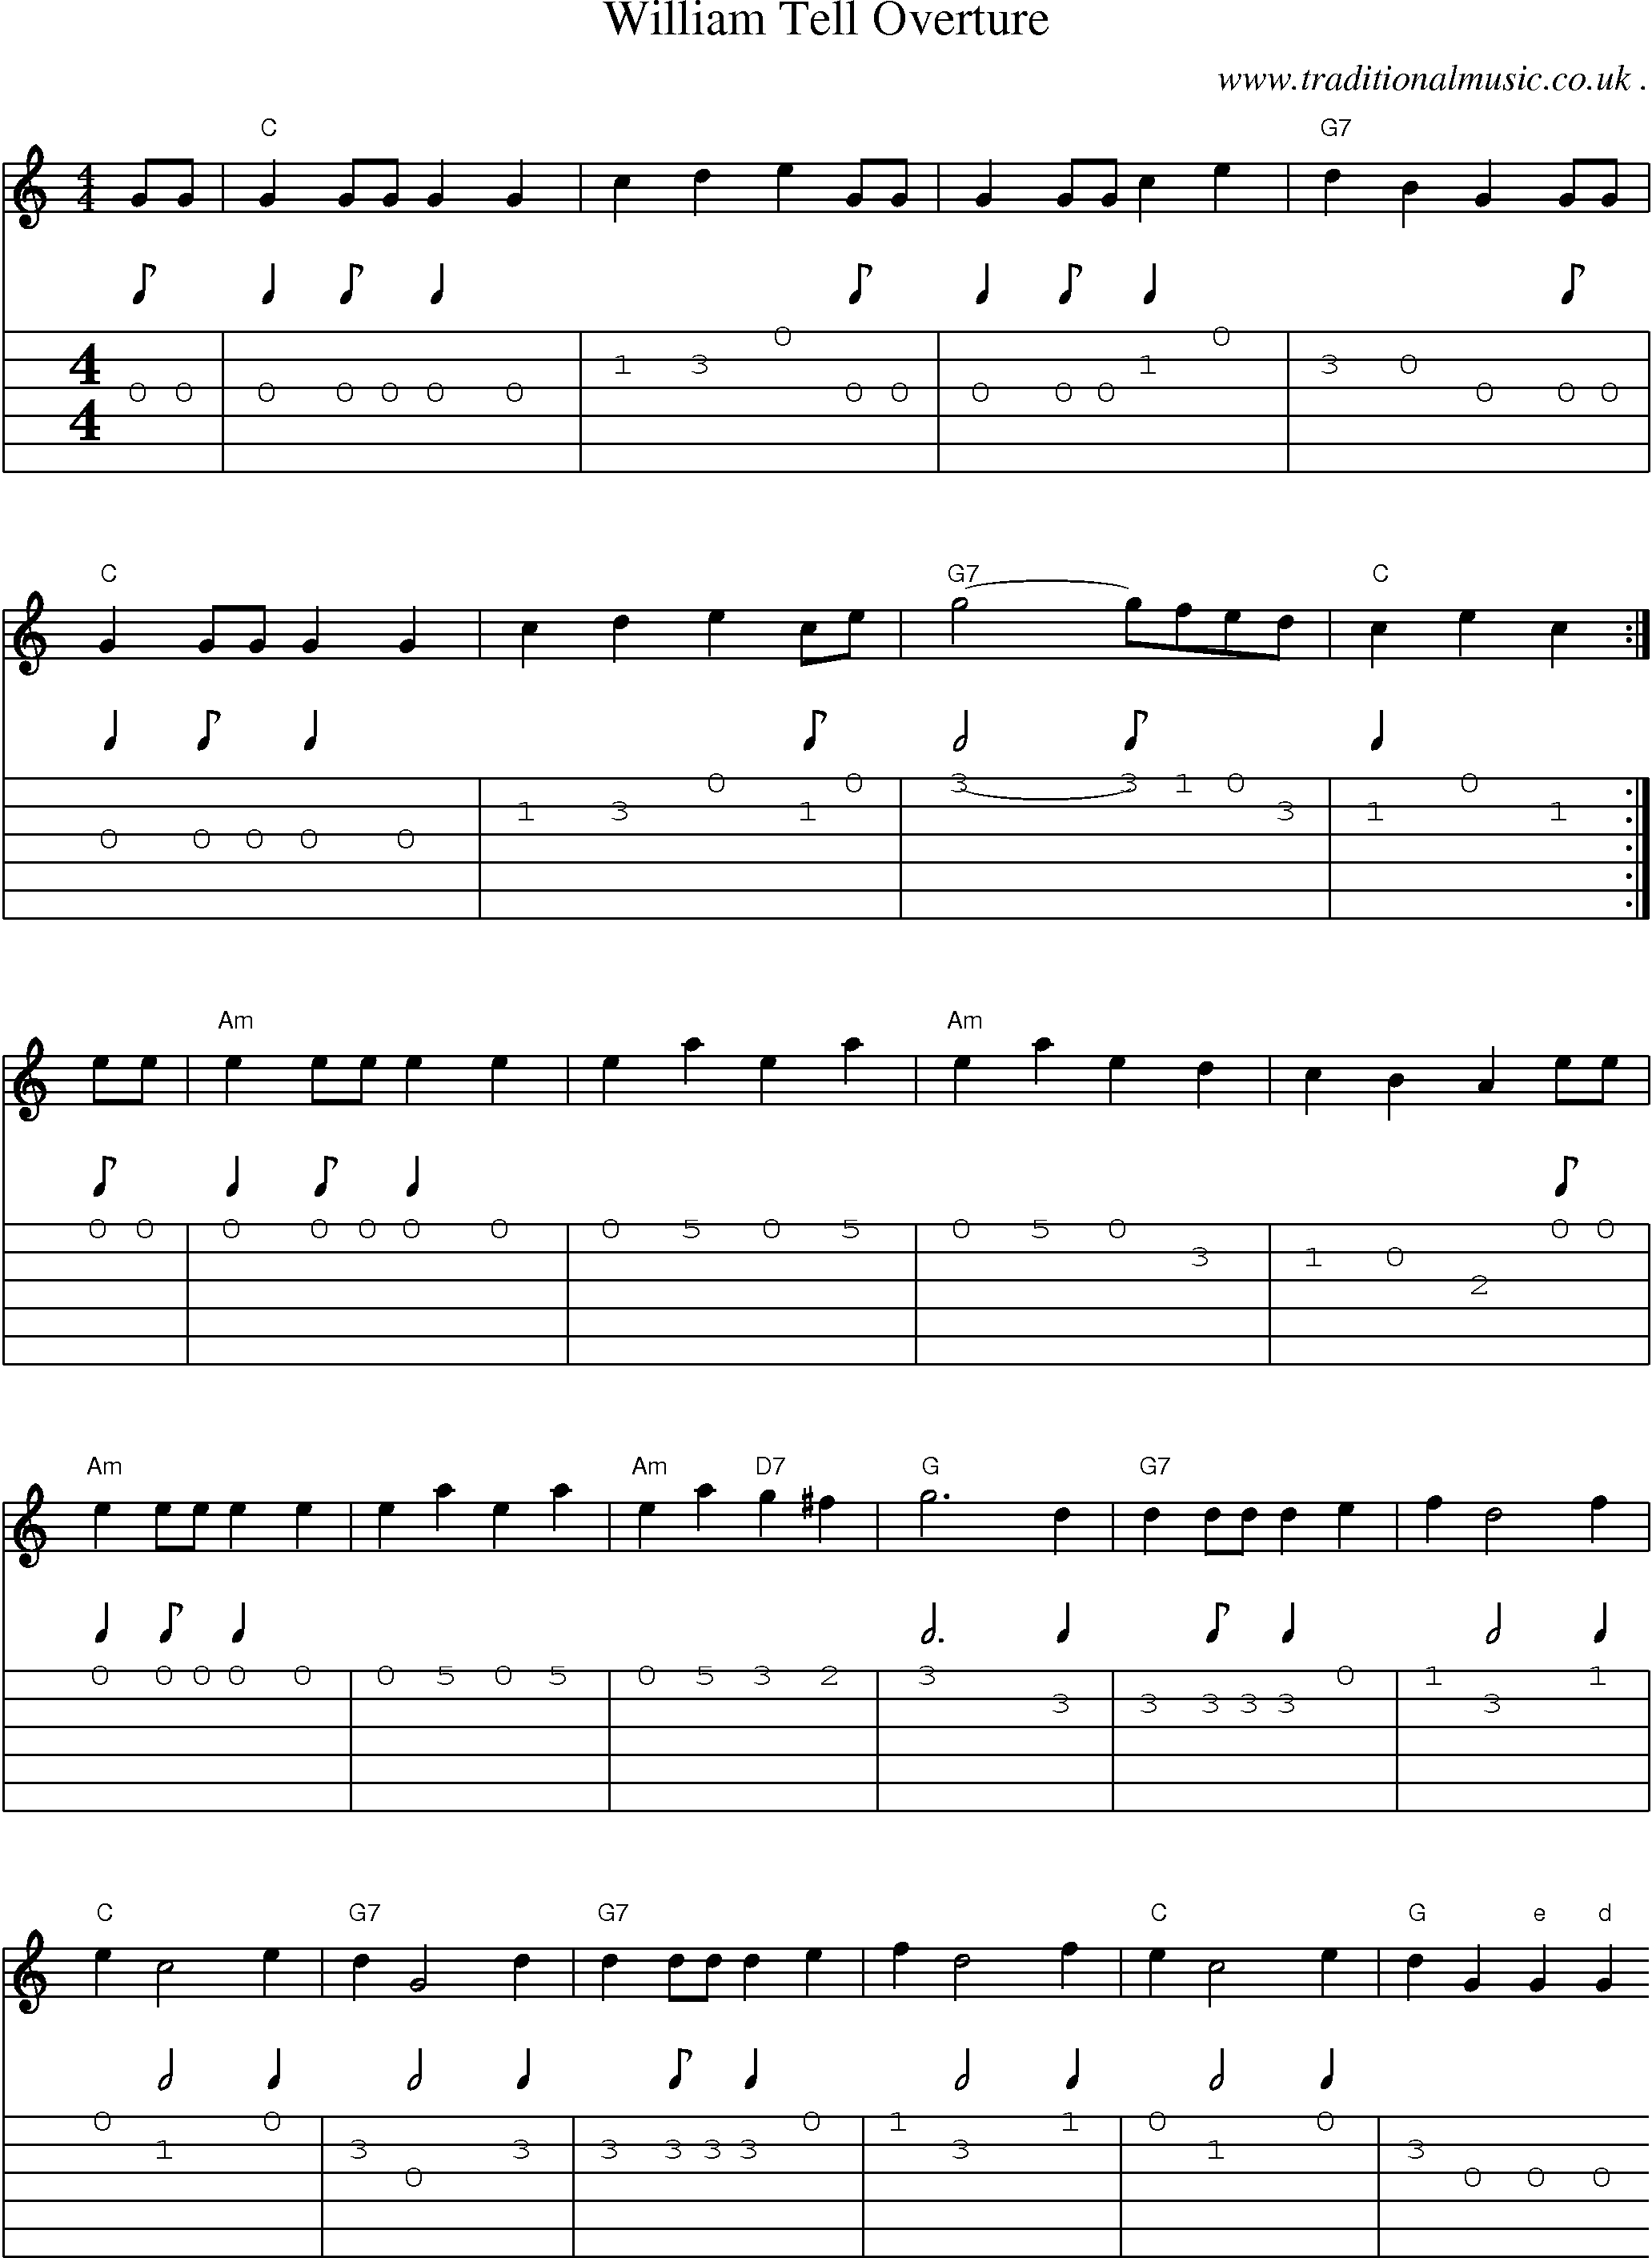 Sheet-Music and Guitar Tabs for William Tell Overture